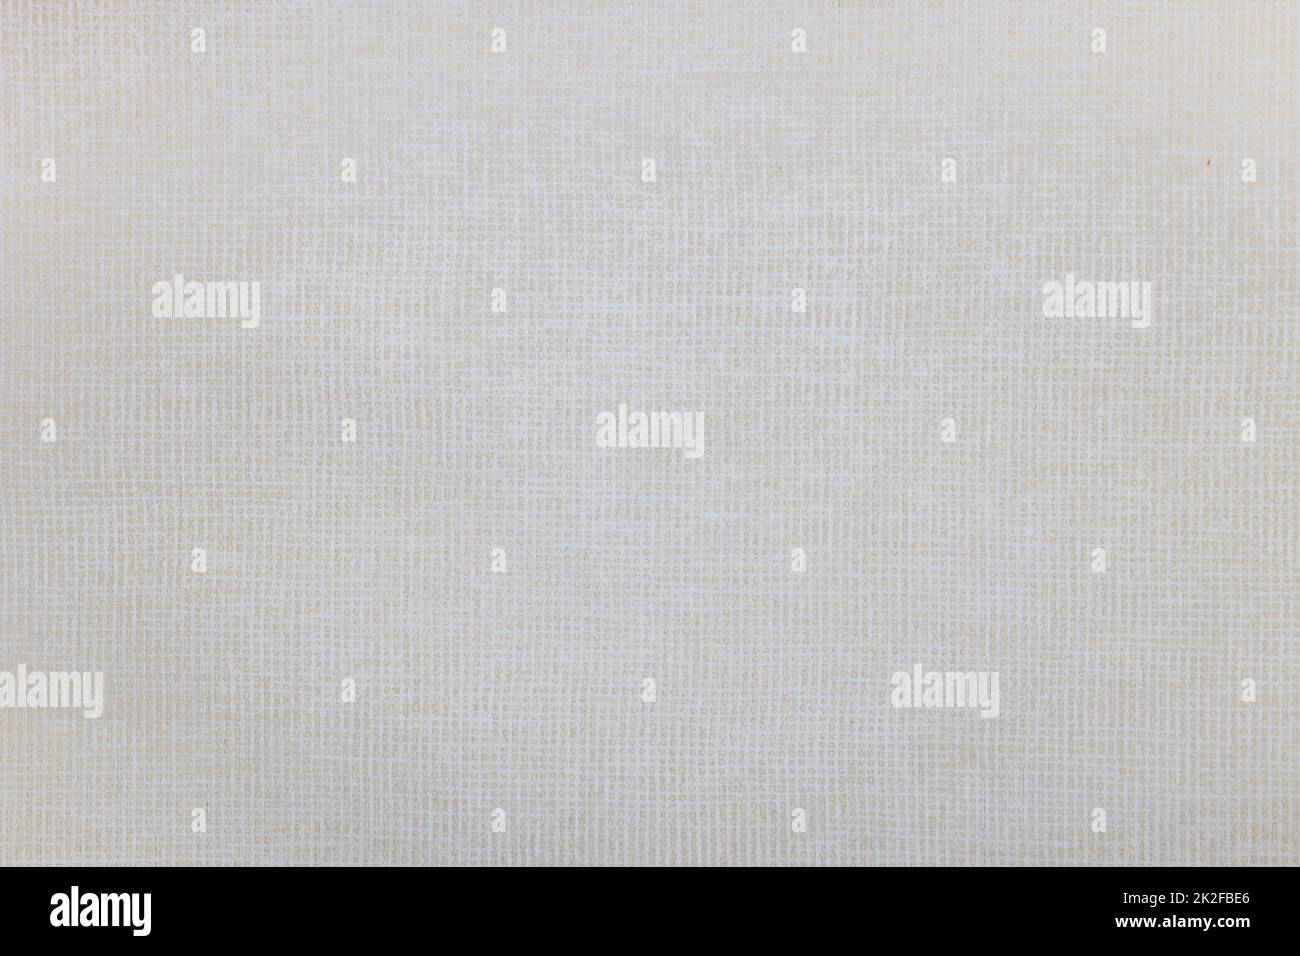 Light natural linen material texture or background Stock Photo